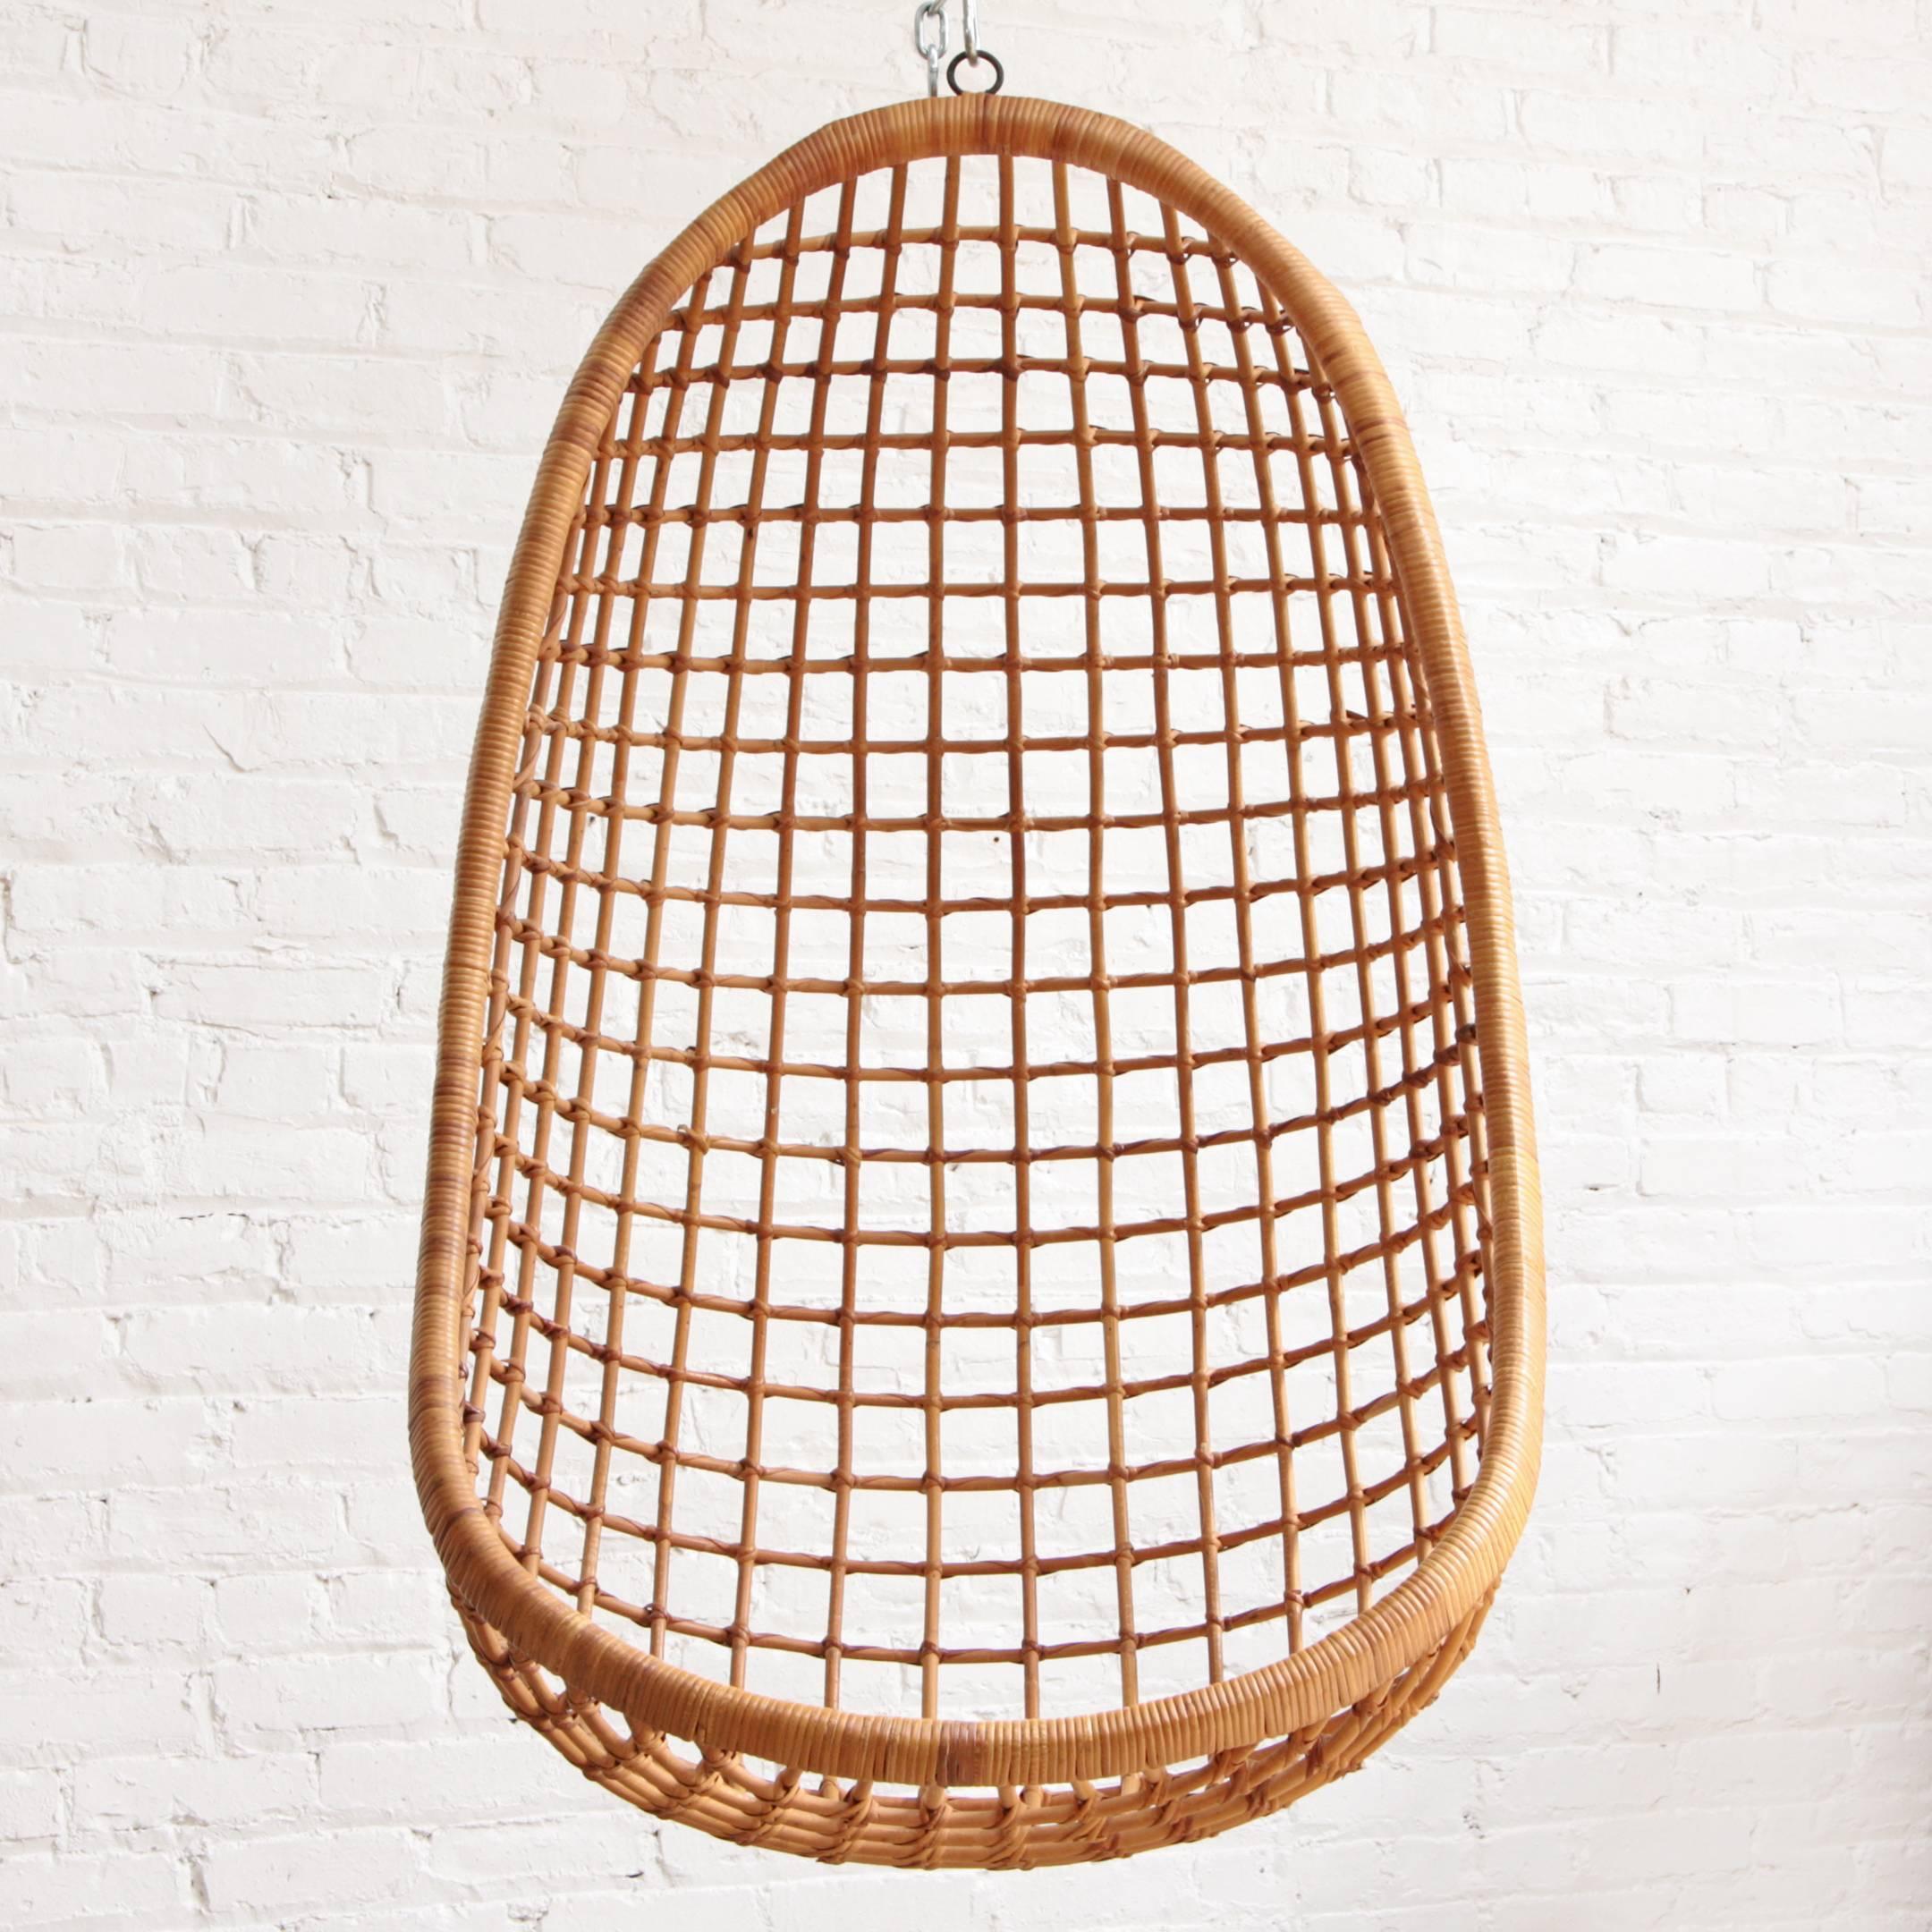 Bent bamboo and cane hanging egg chair by Rohe Noordwolde, The Netherlands, 1960. Reinforced with iron cage and hanging point.

Measurements refer to size of actual object. Seat height is dependent on how high chair is hung.